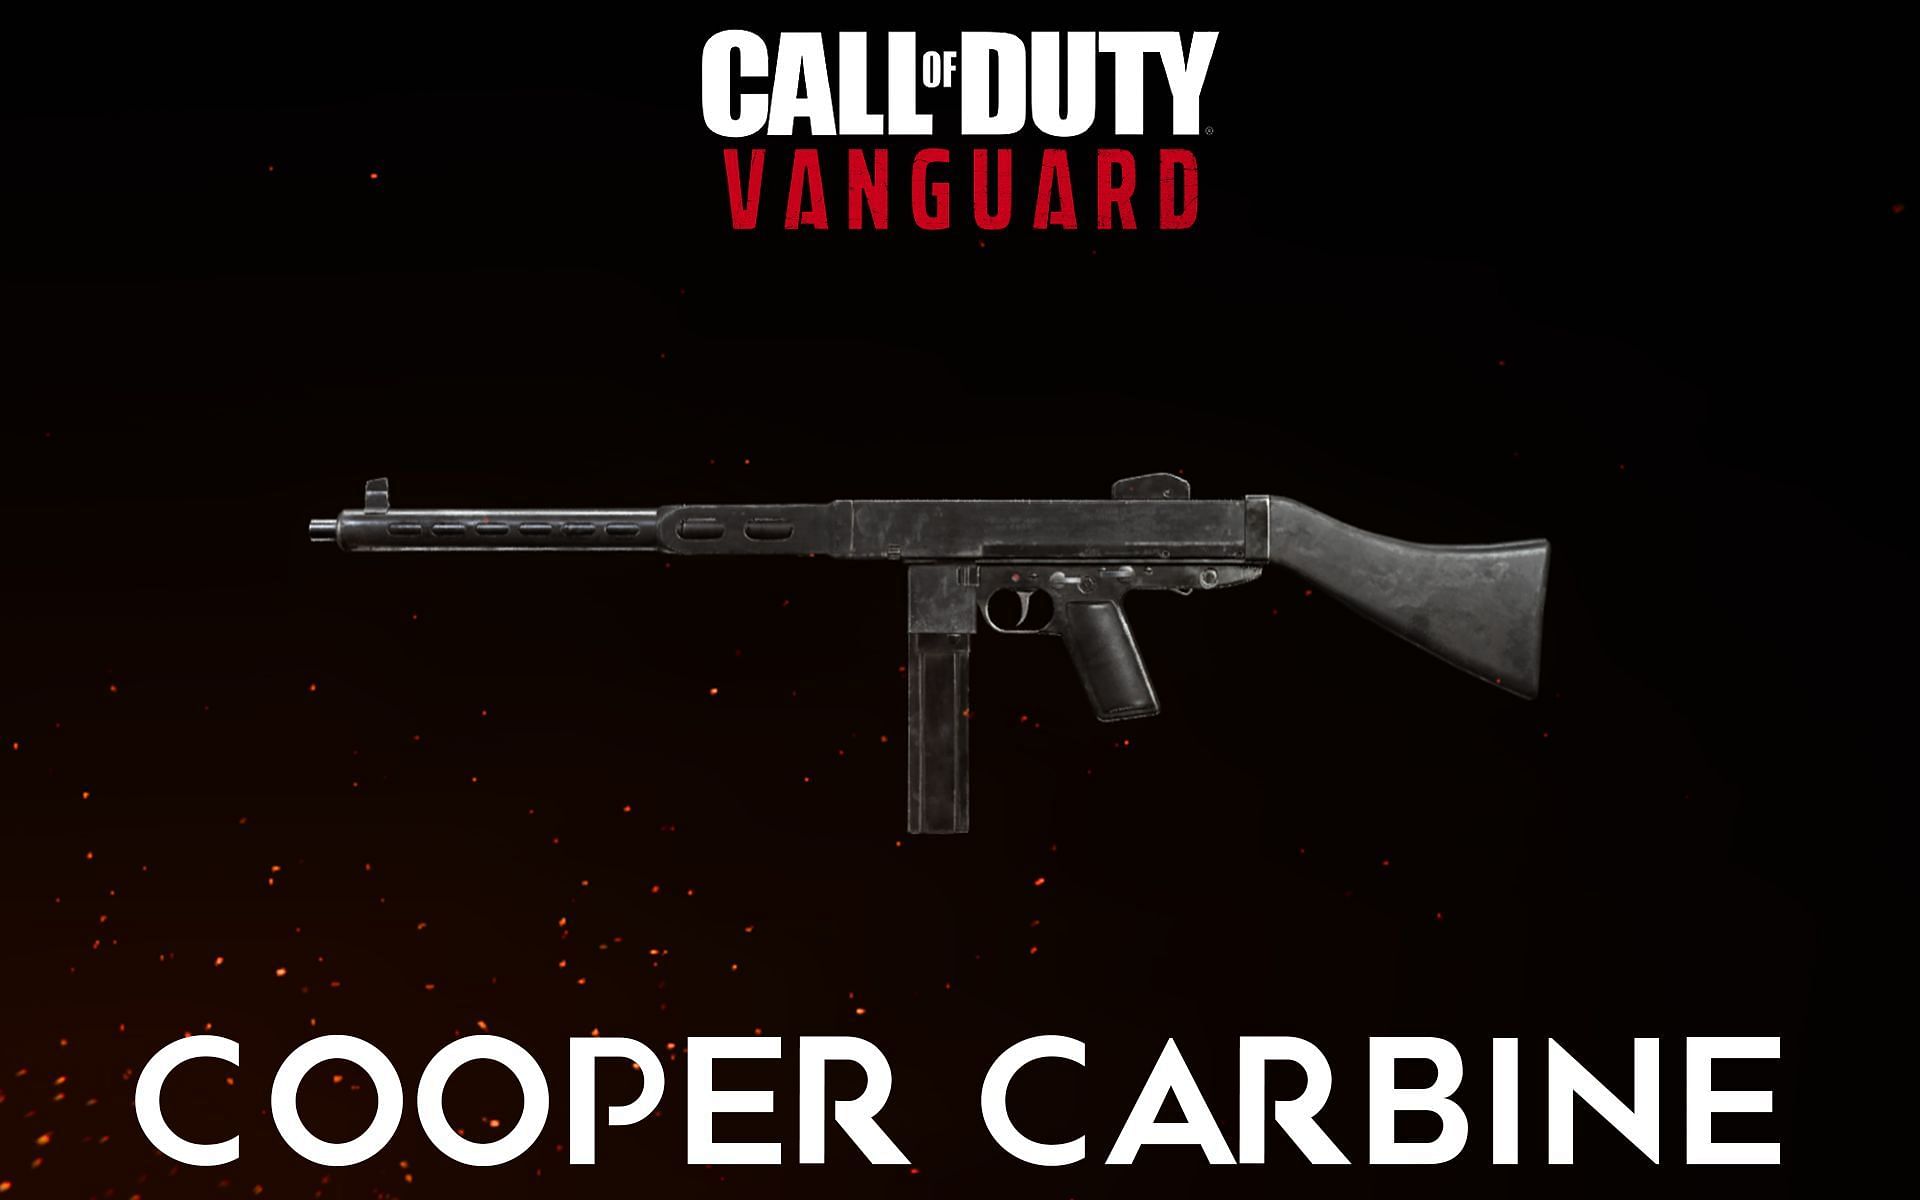 Cooper Carbine is one of the best assault rifles in Call of Duty: Vanguard (Image by Activision)